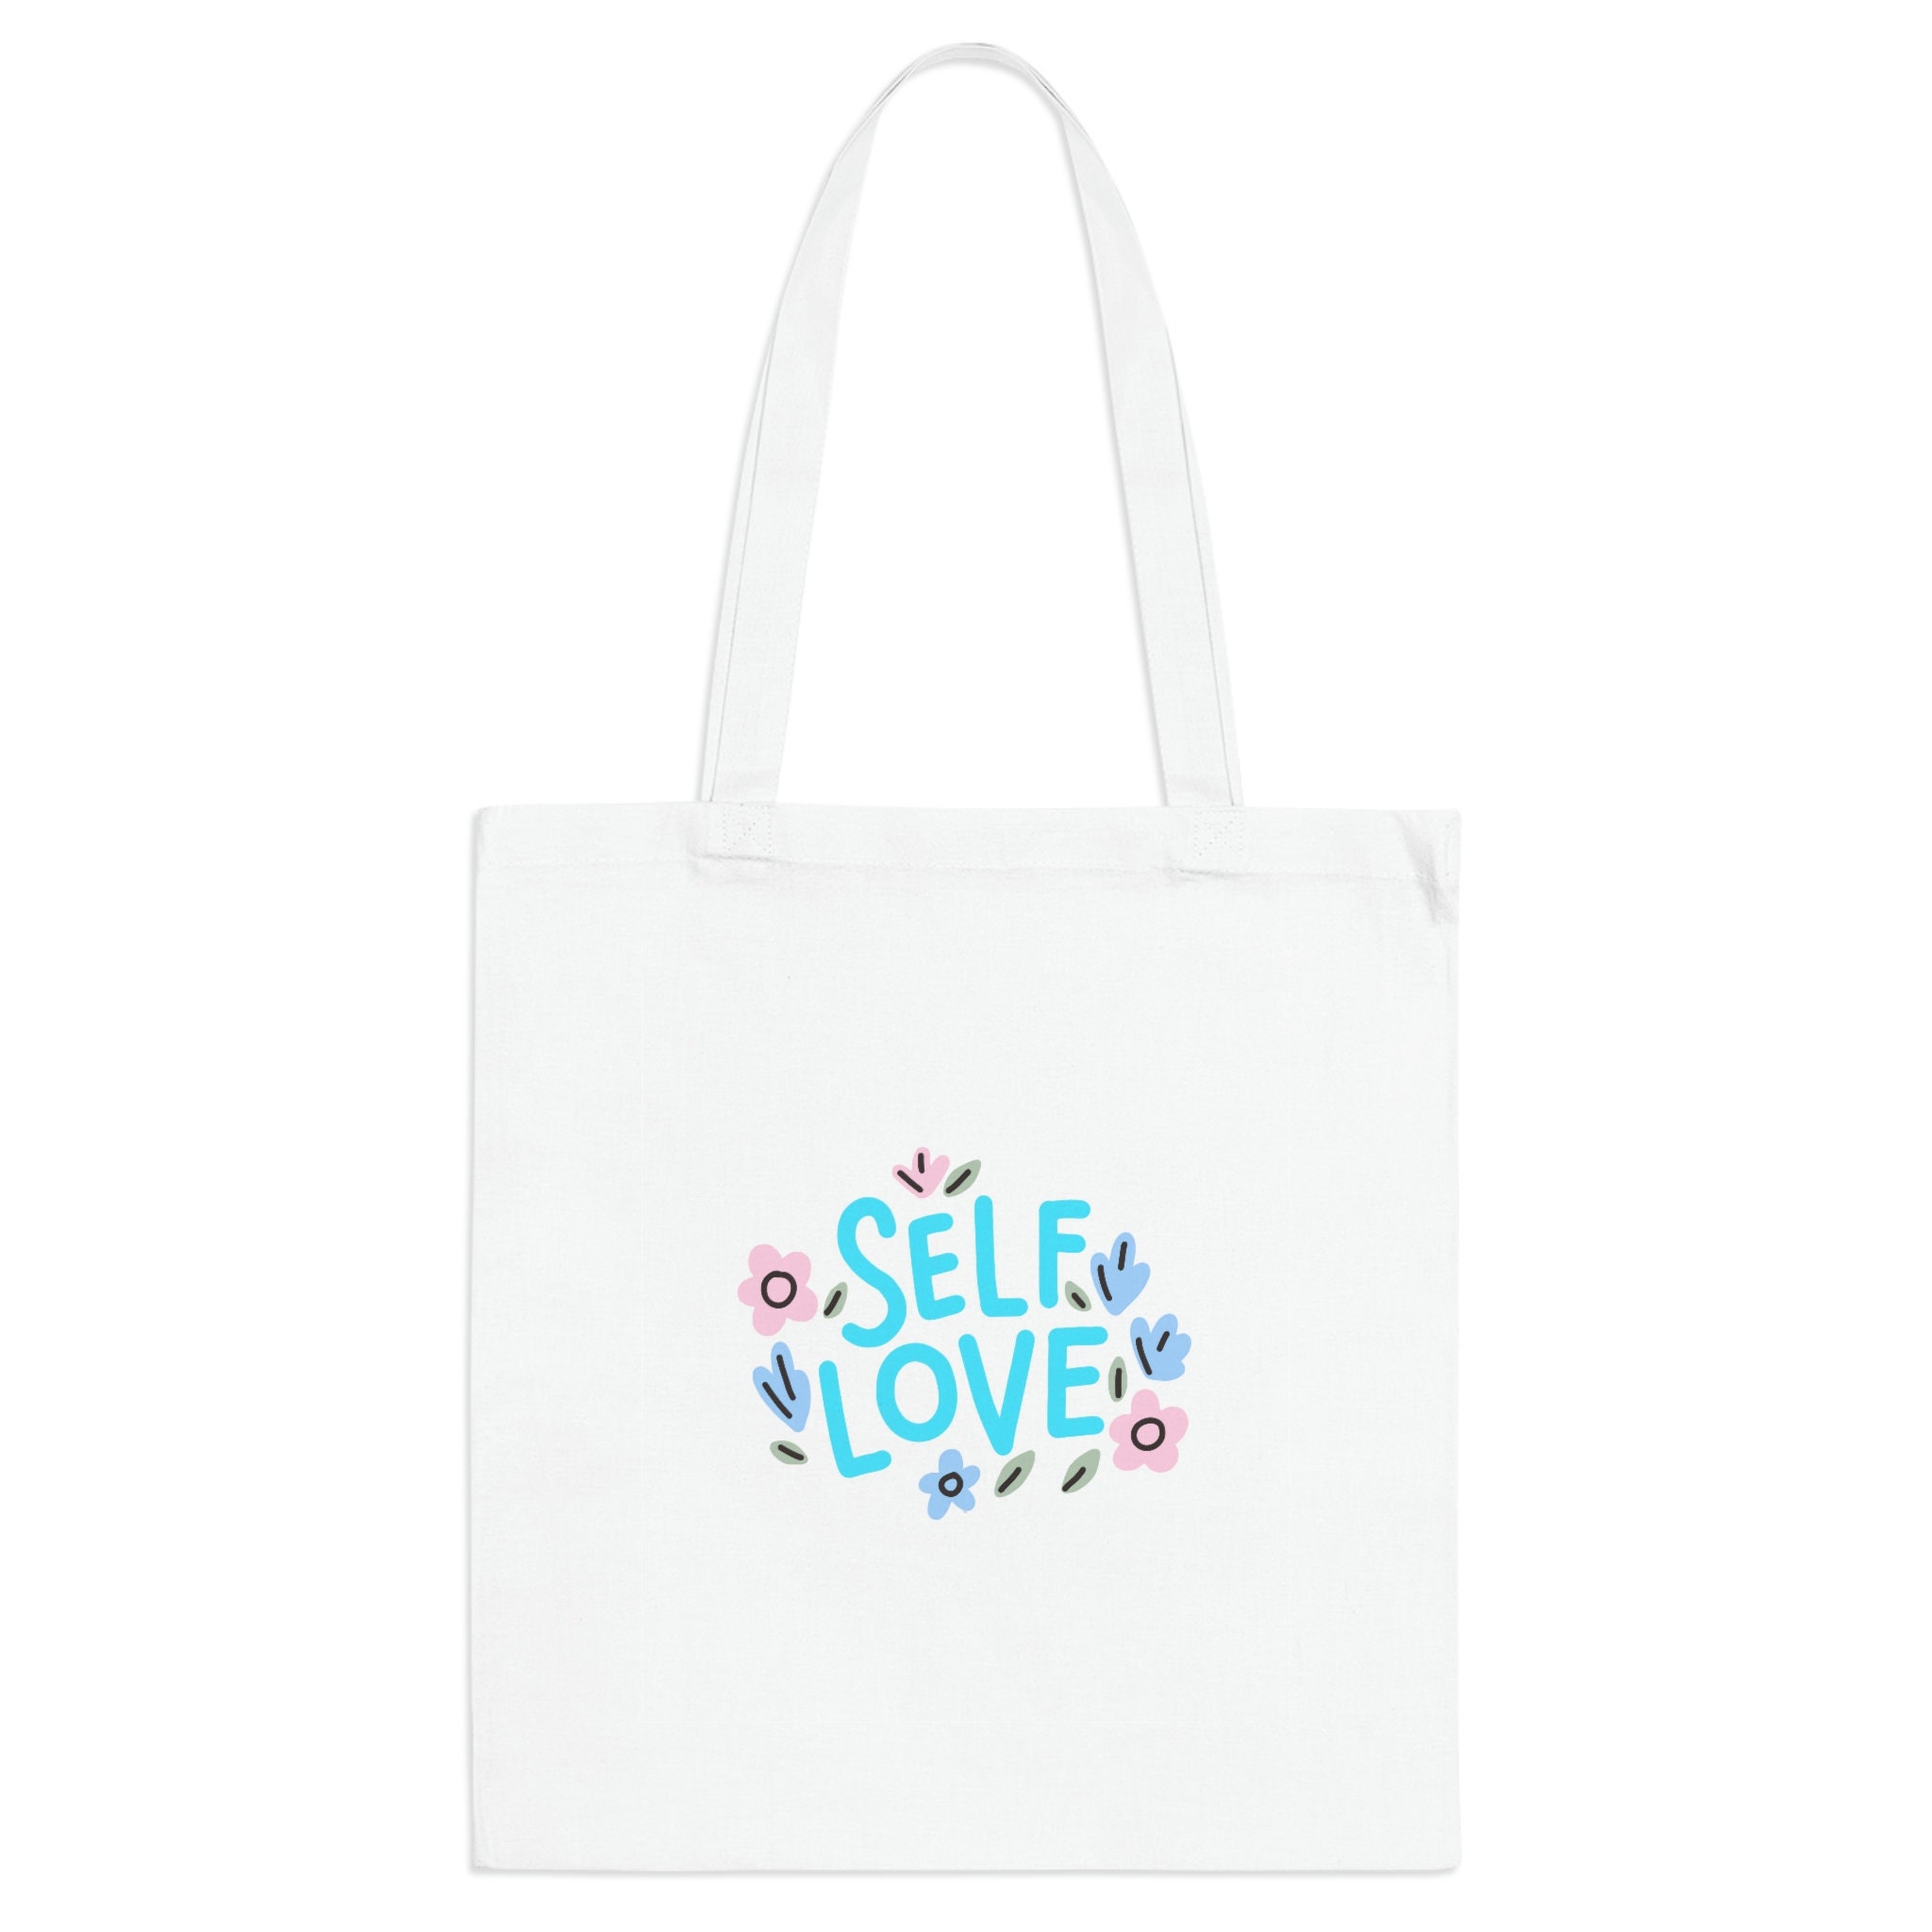 Hello Kitty Leather Tote Bags Your 30-Something Self Will Love